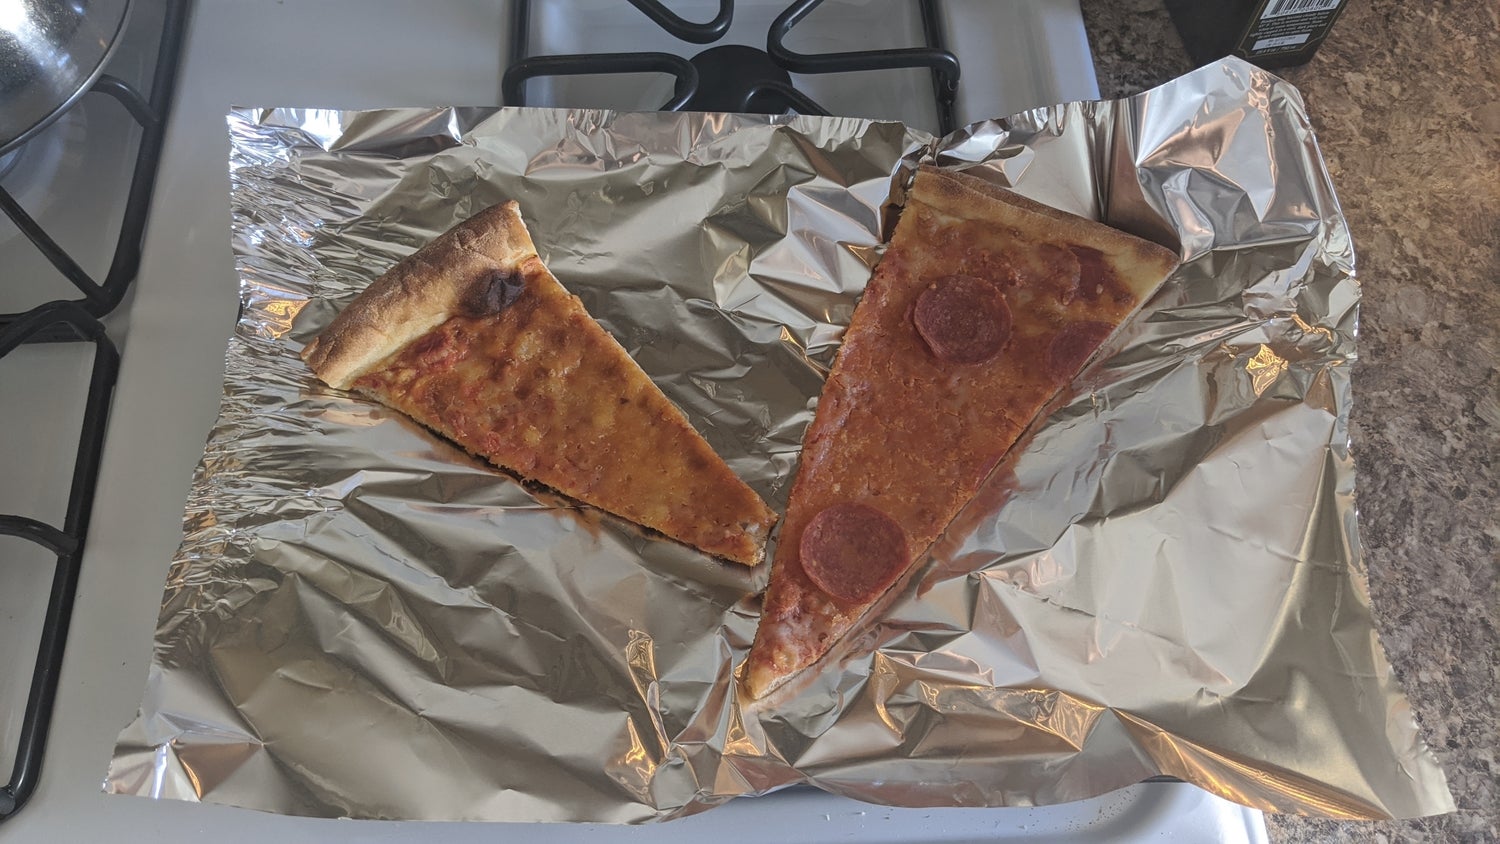 Two slices of pizza (one cheese and one pepperoni) on aluminum foil. When reheating pizza in an oven, never put it straight on the rack.